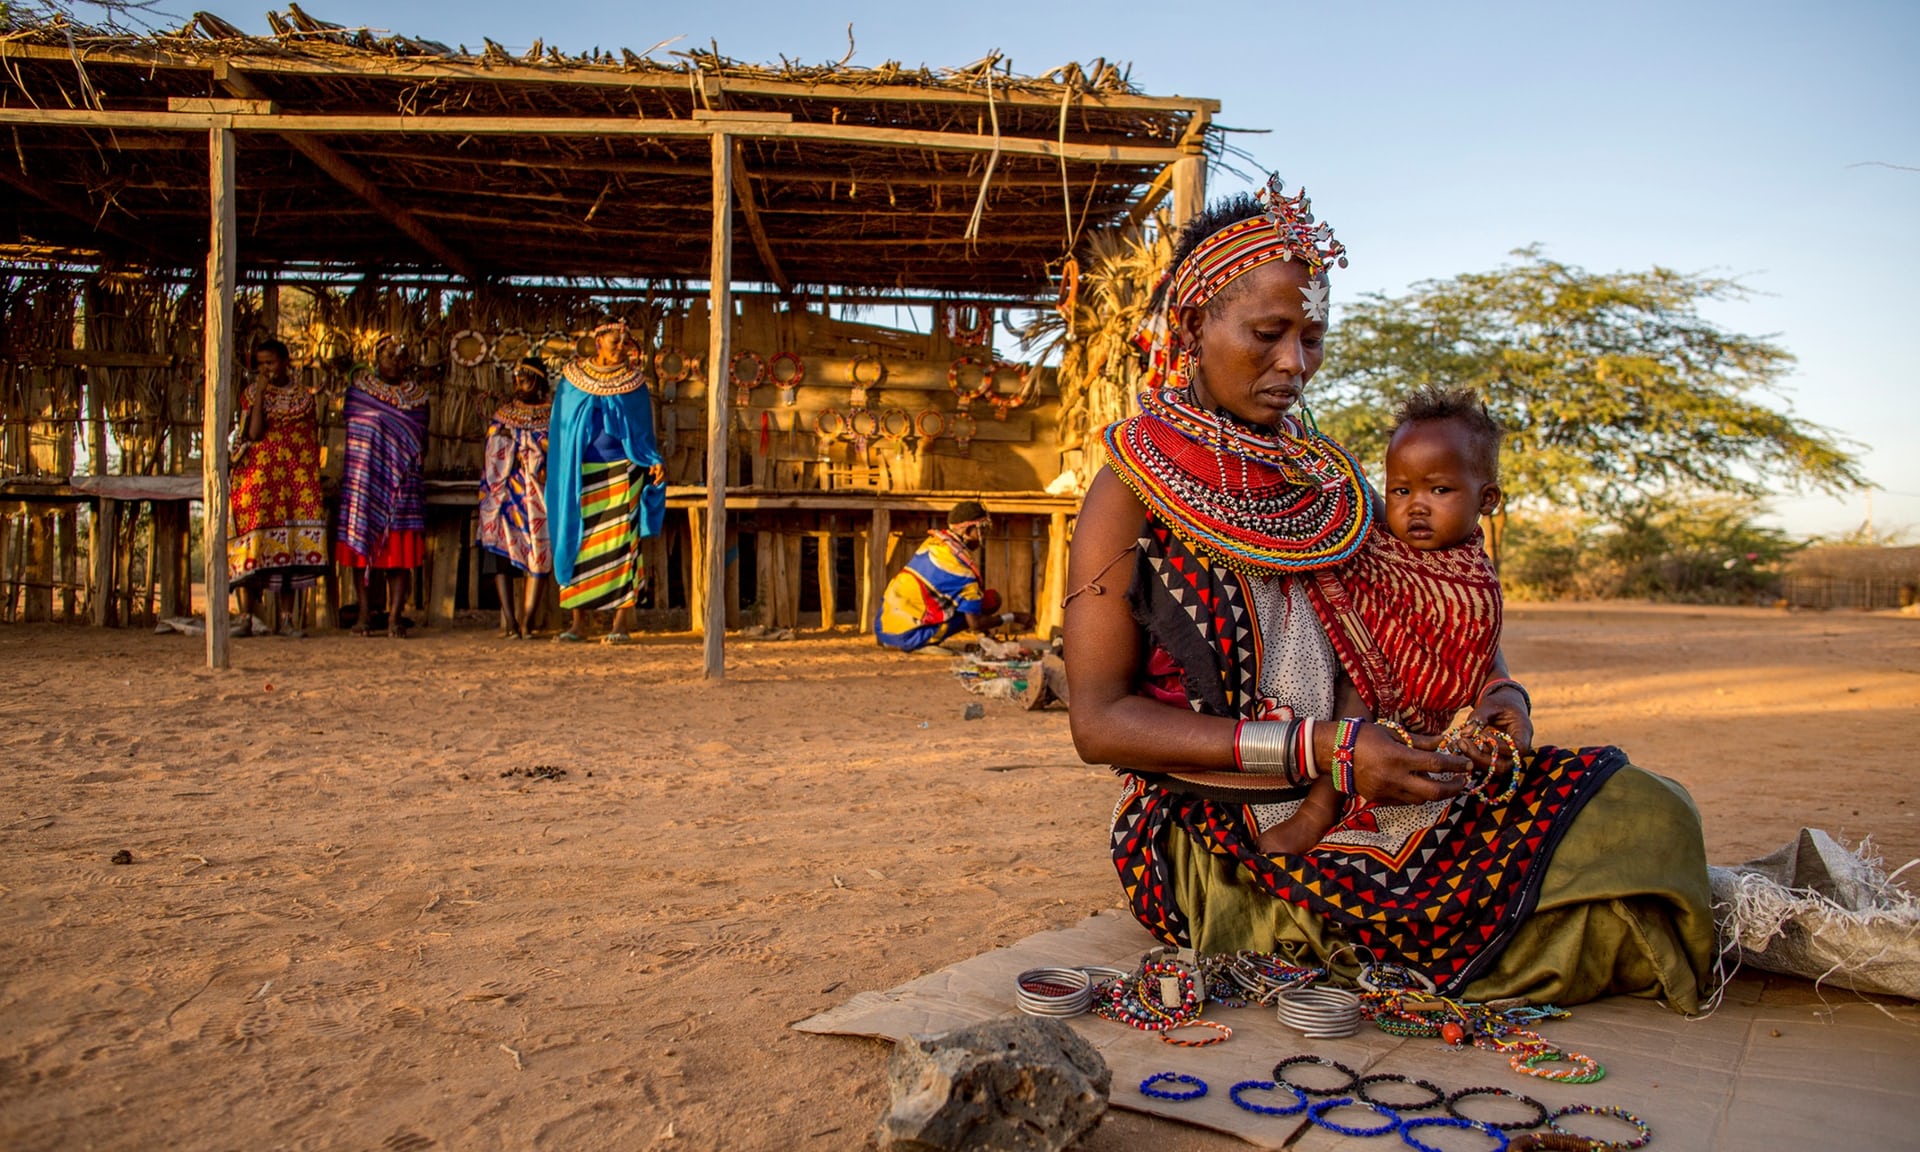 Umoja women make jewellery to sell to tourists. Here, China Laprodati with her baby is selling her jewellery to visitors.